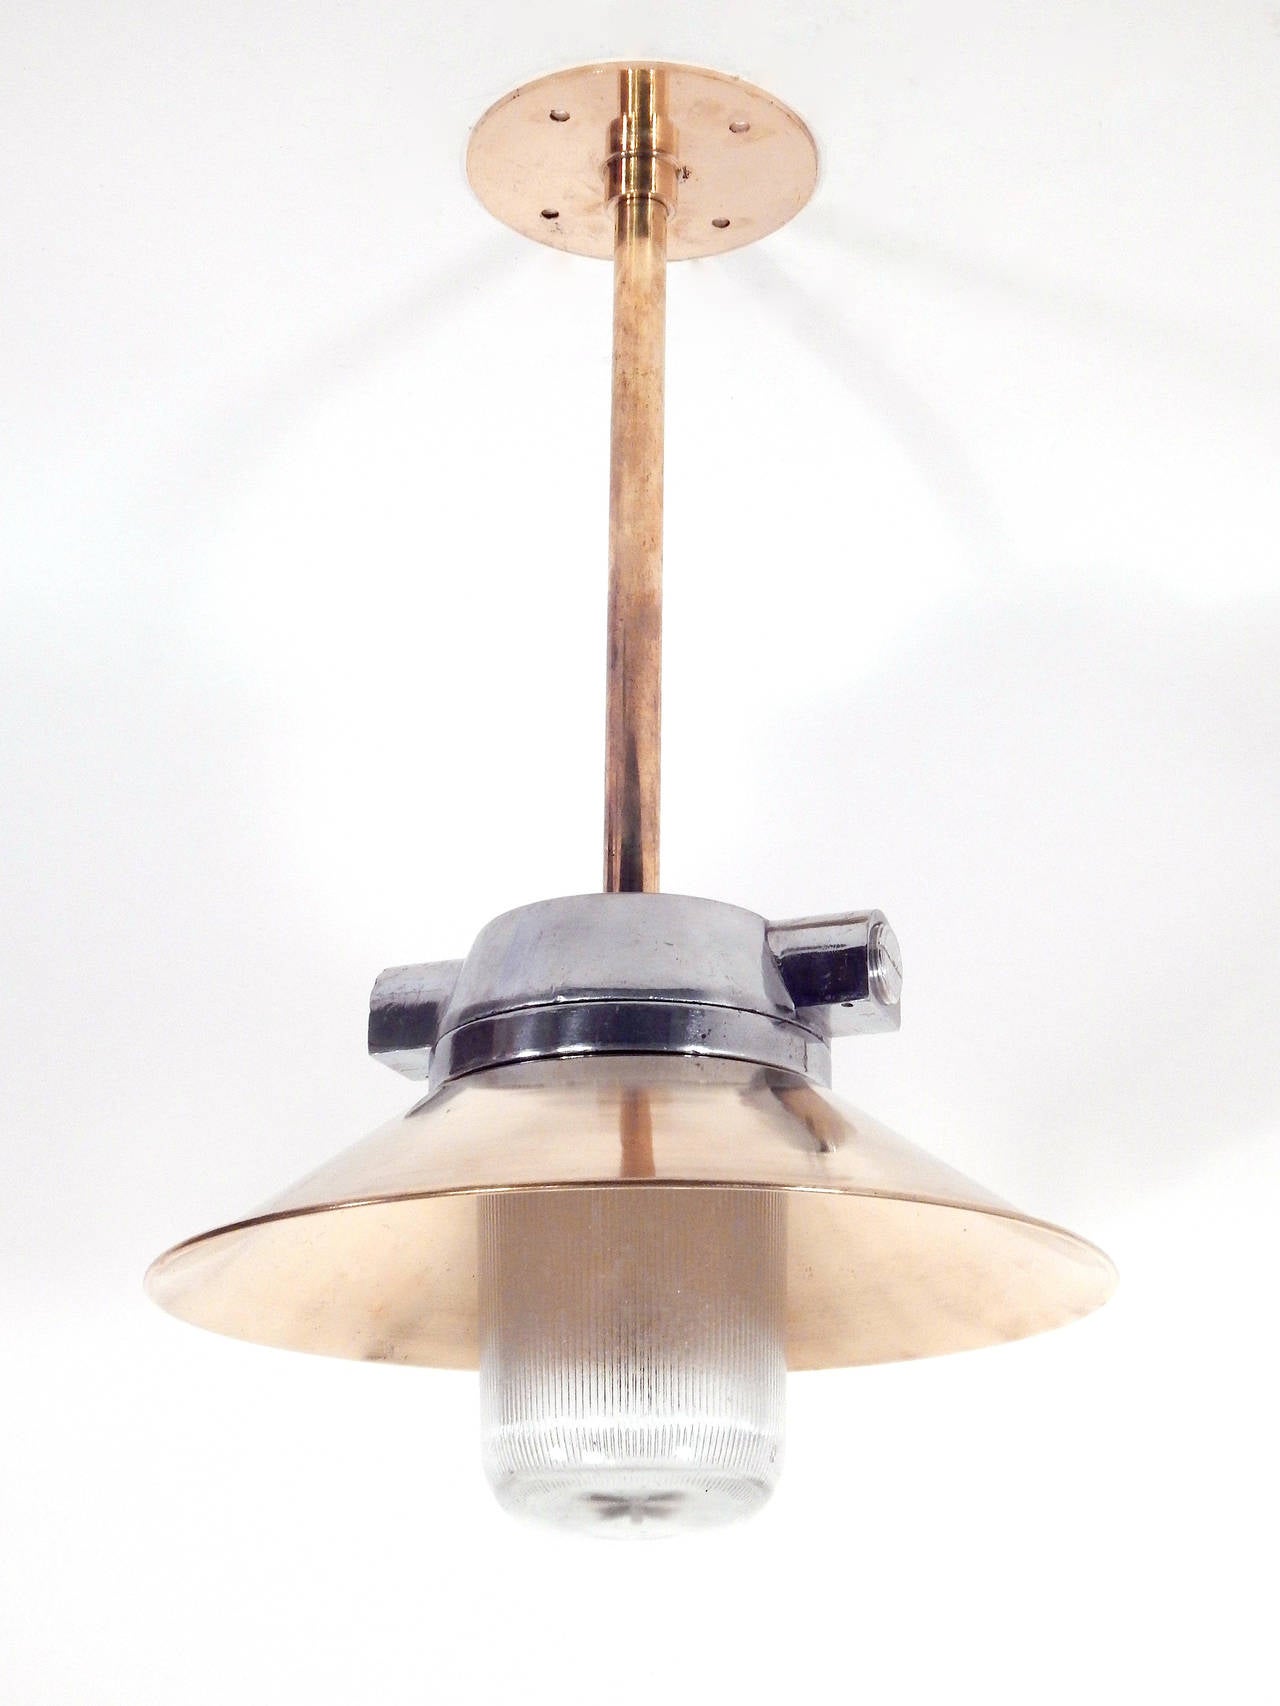 Brass and steel ships lights with holophane globes. Recently wired. Stems,  shades and ceiling canopies are new.